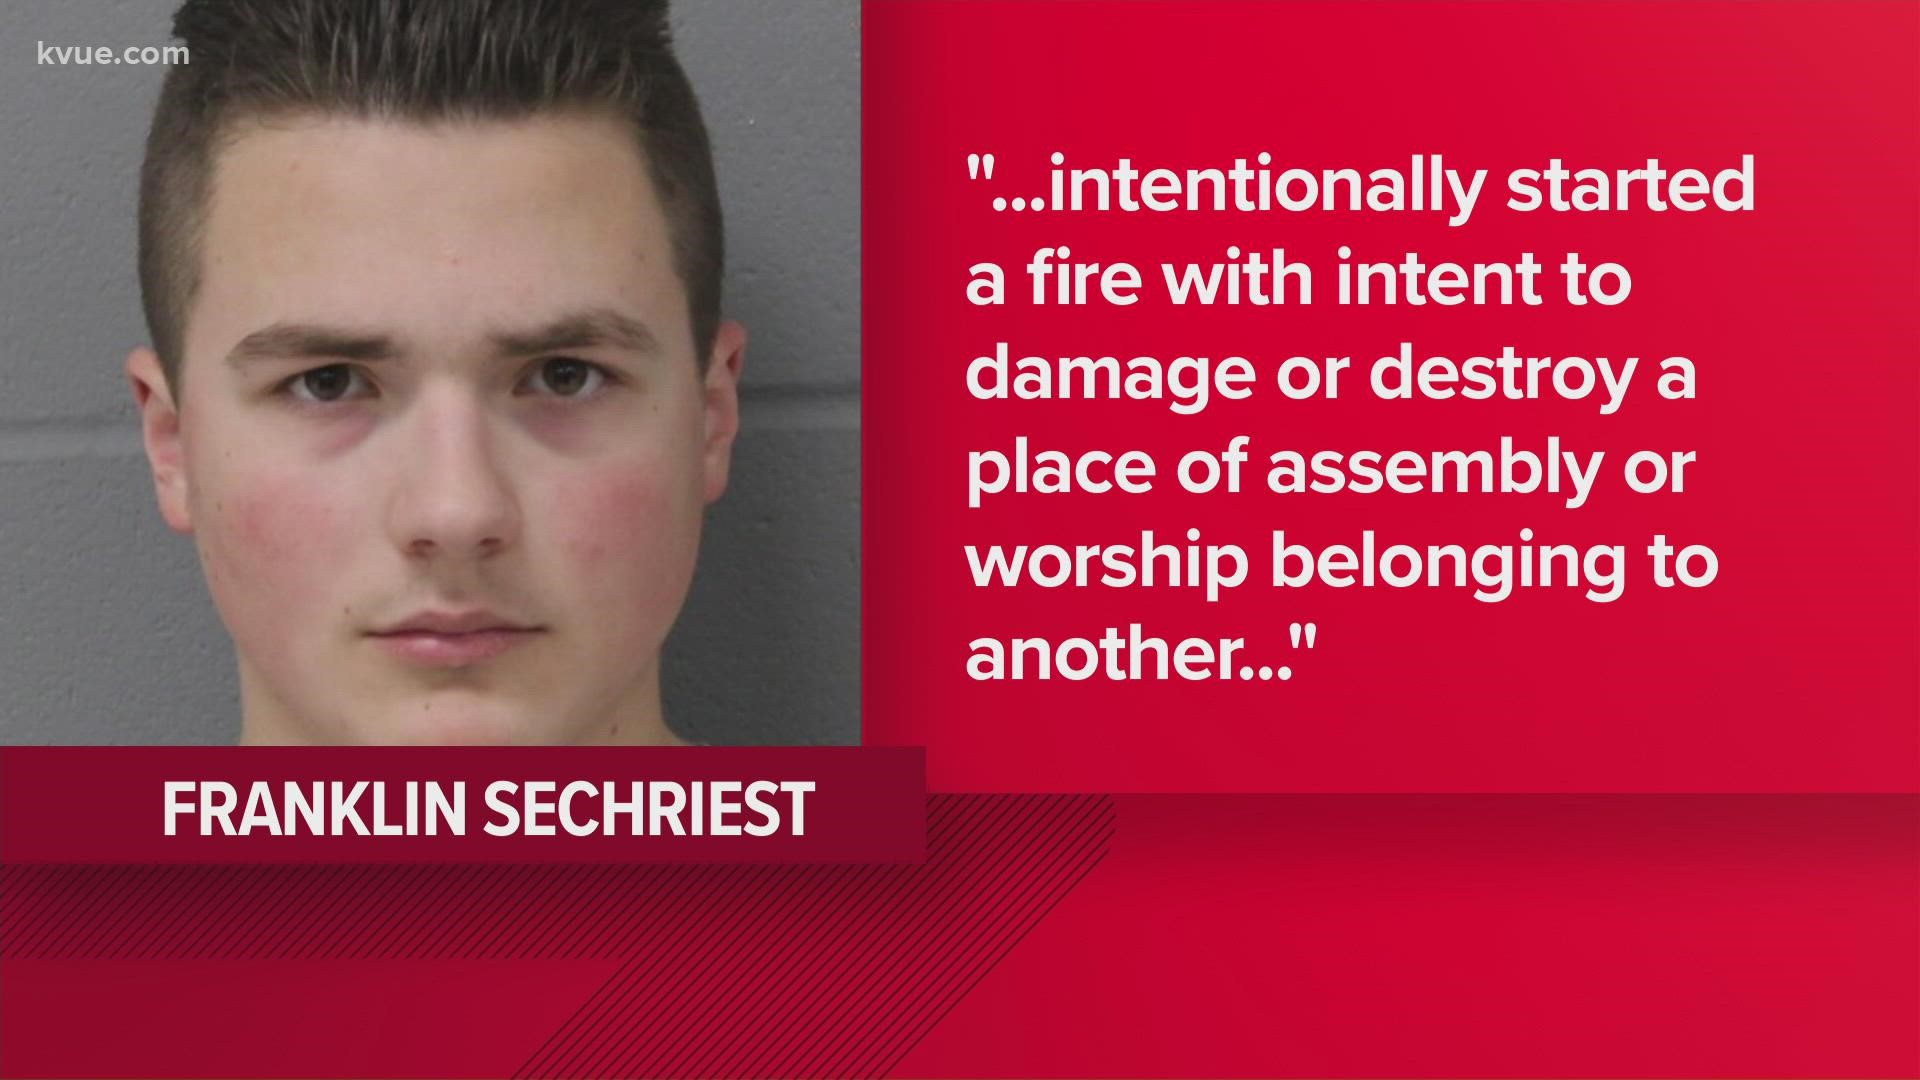 An 18-year-old man has been arrested and faces a felony arson charge after the fire at Congregation Beth Israel in North Austin.